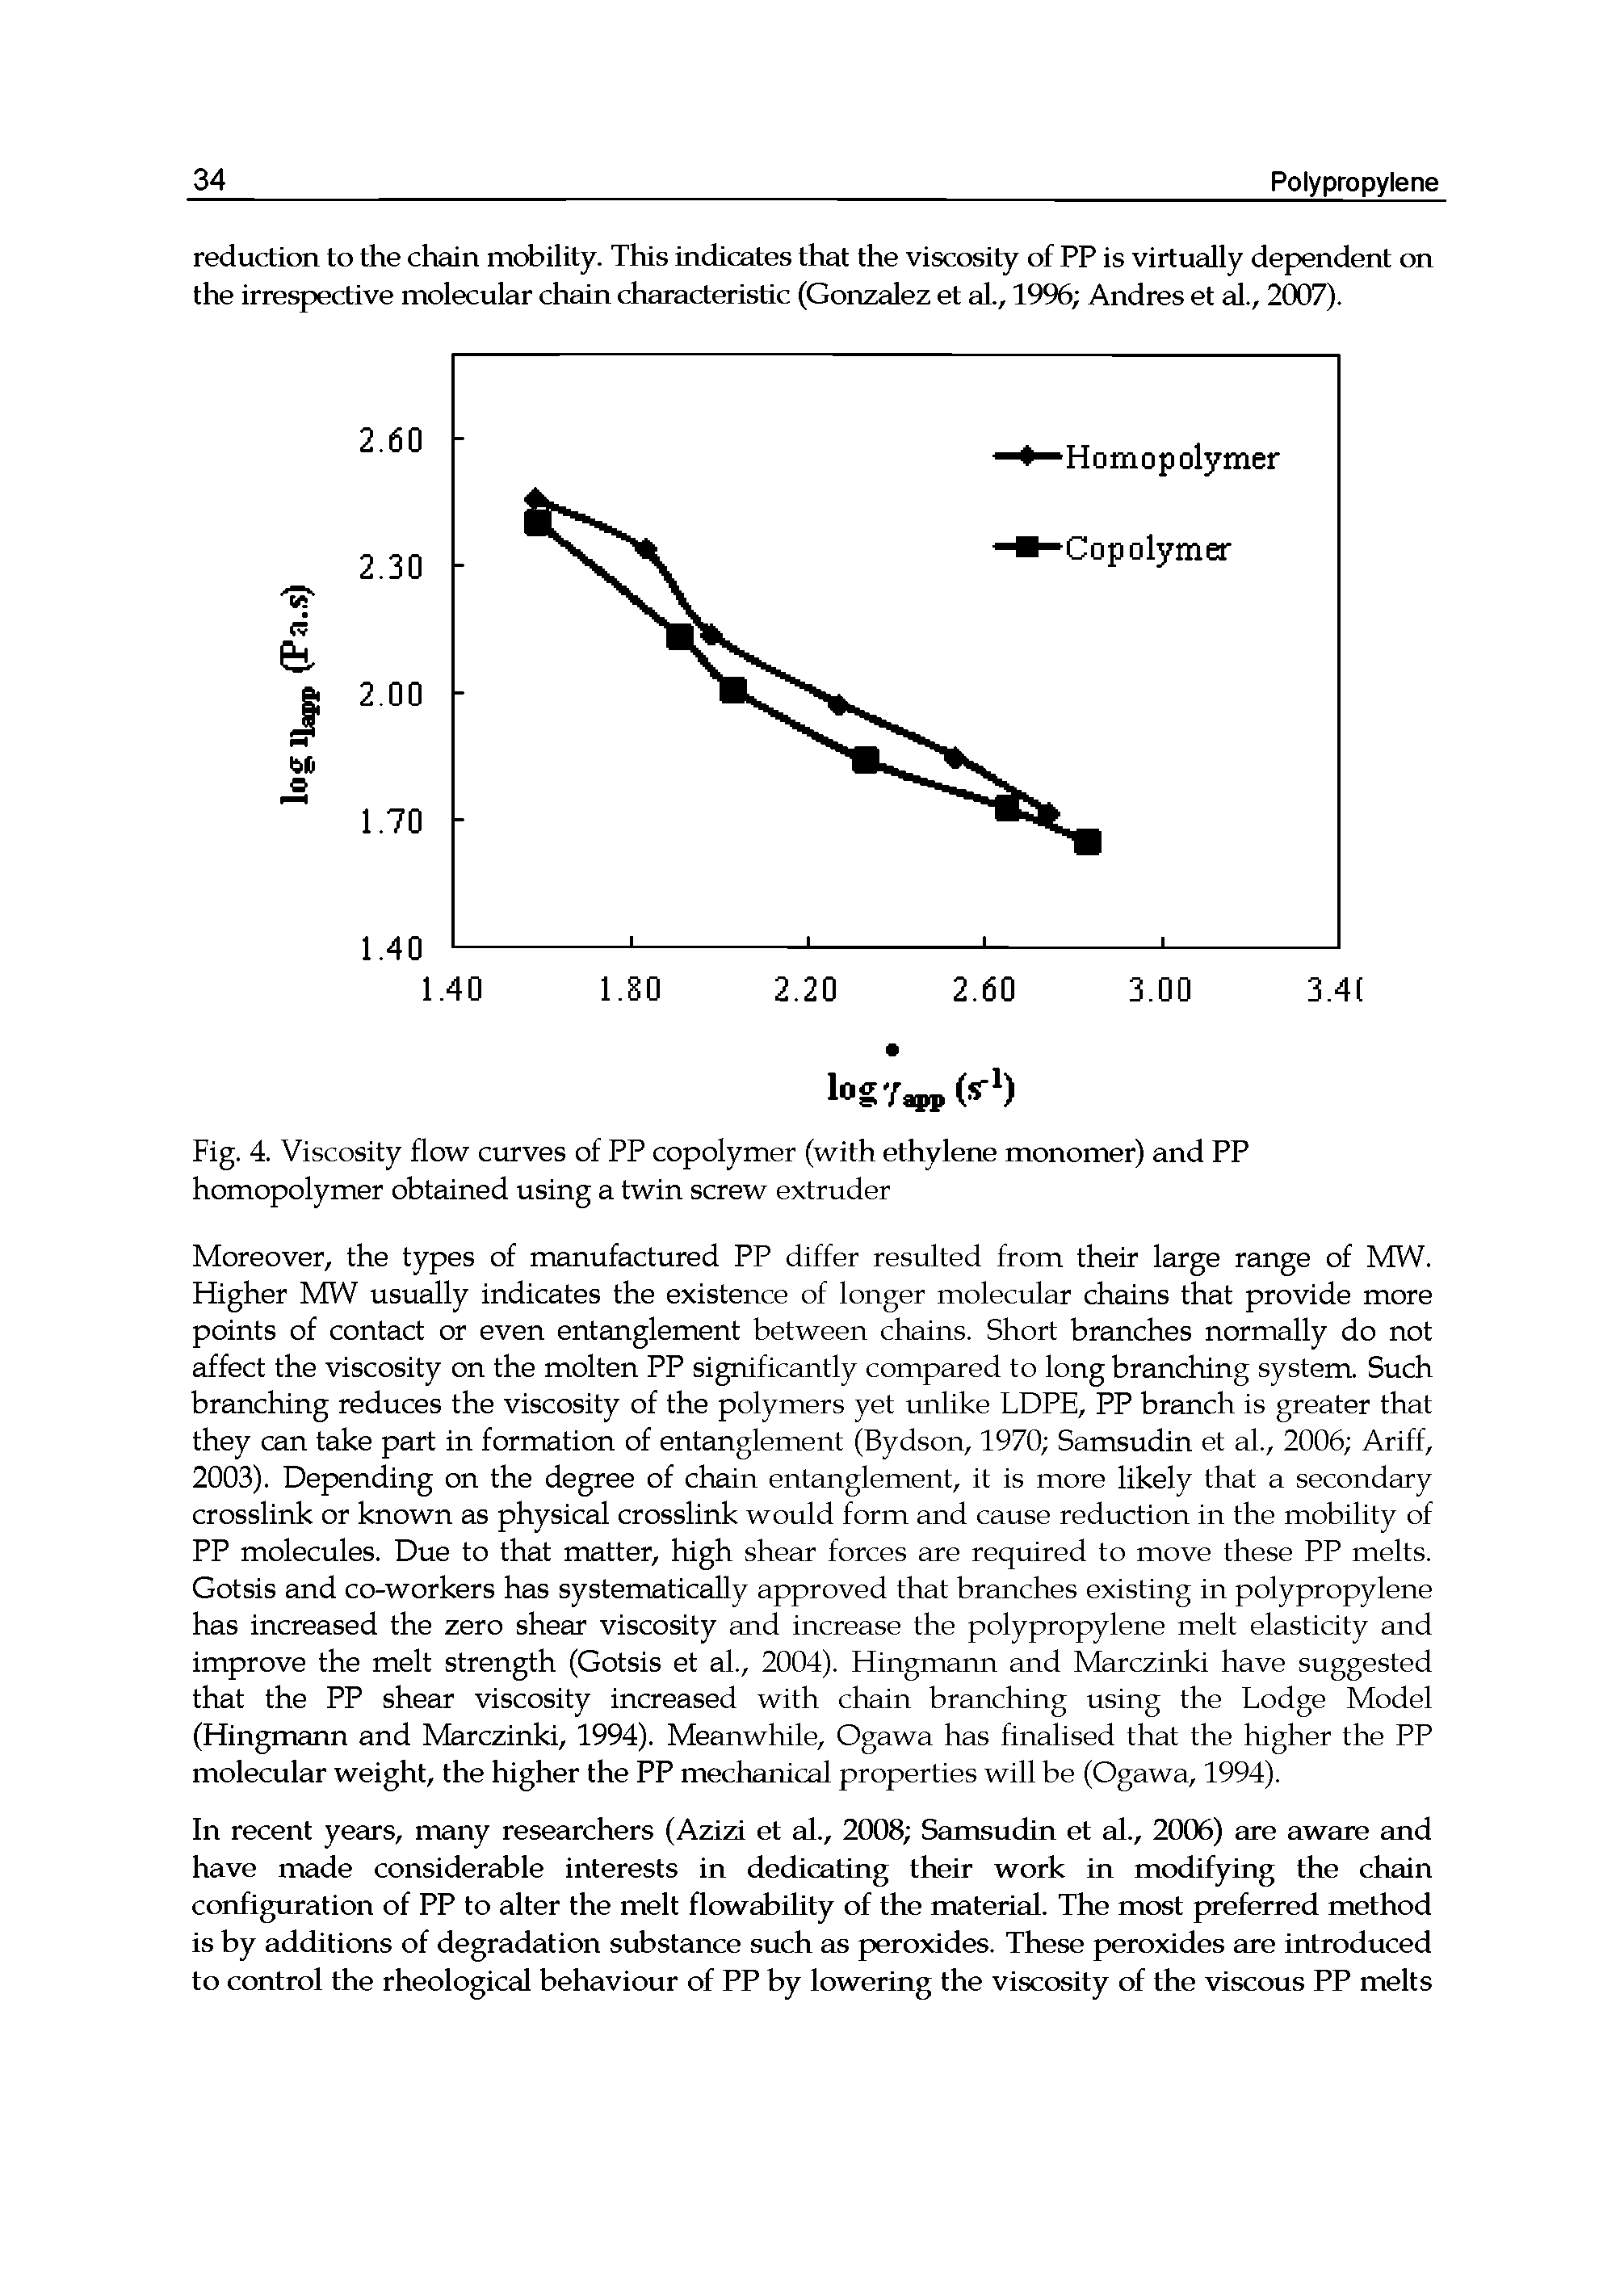 Fig. 4. Viscosity flow curves of PP copolymer (with ethylene monomer) and PP homopolymer obtained using a twin screw extruder...